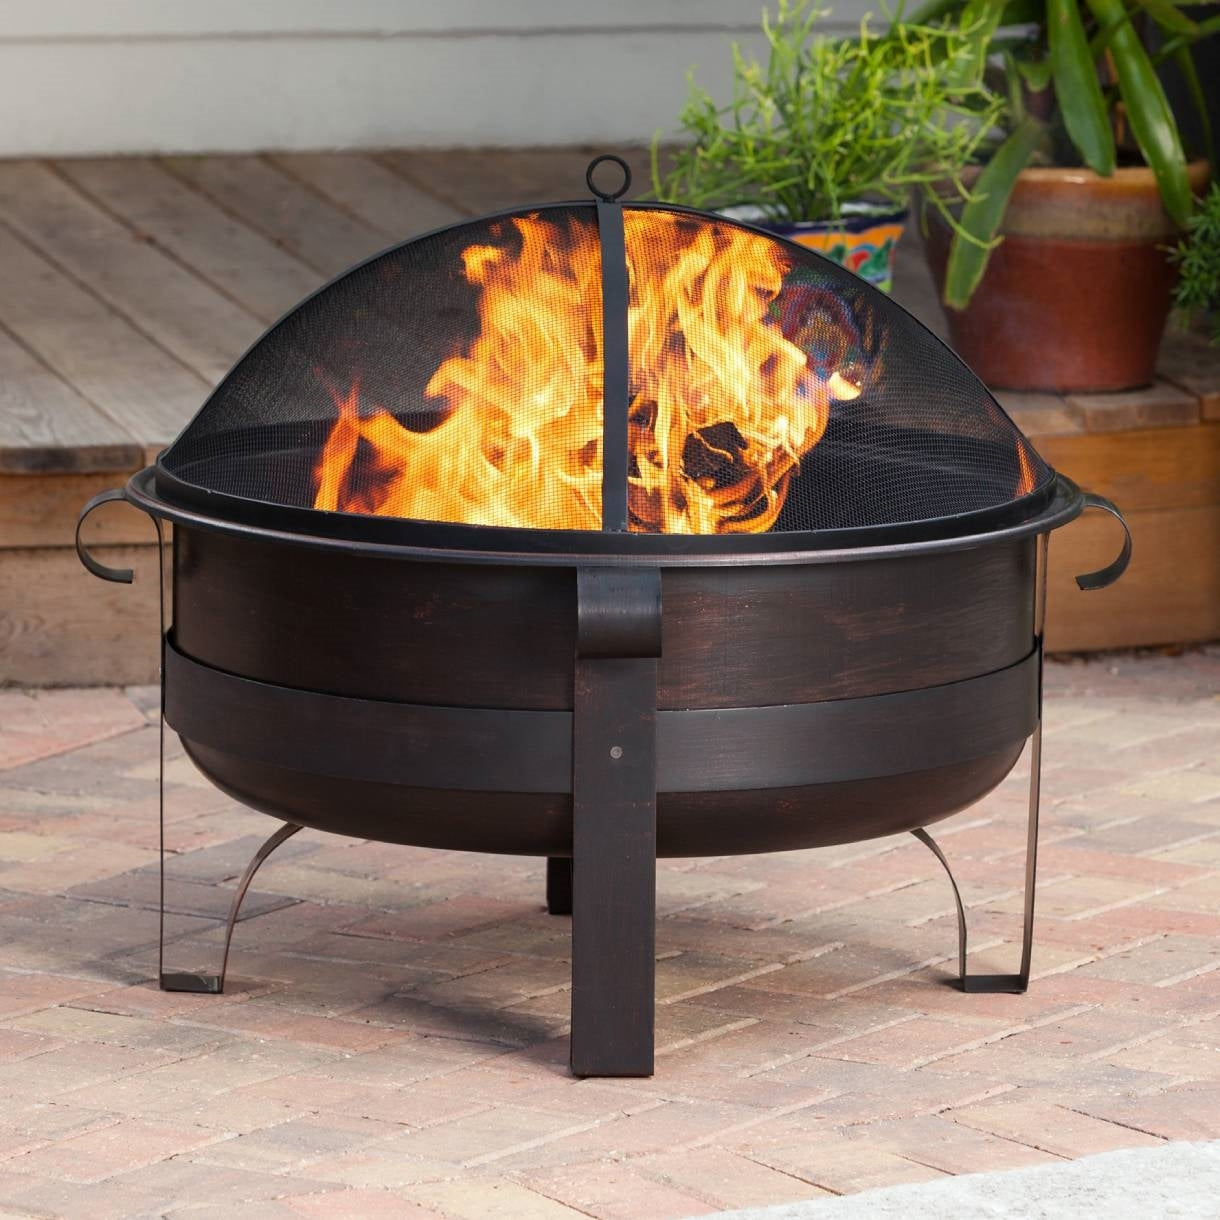 Outdoor > Outdoor Decor > Fire Pits - Heavy Duty 34-inch Fire Pit Deep Steel Cauldron With Screen And Stand